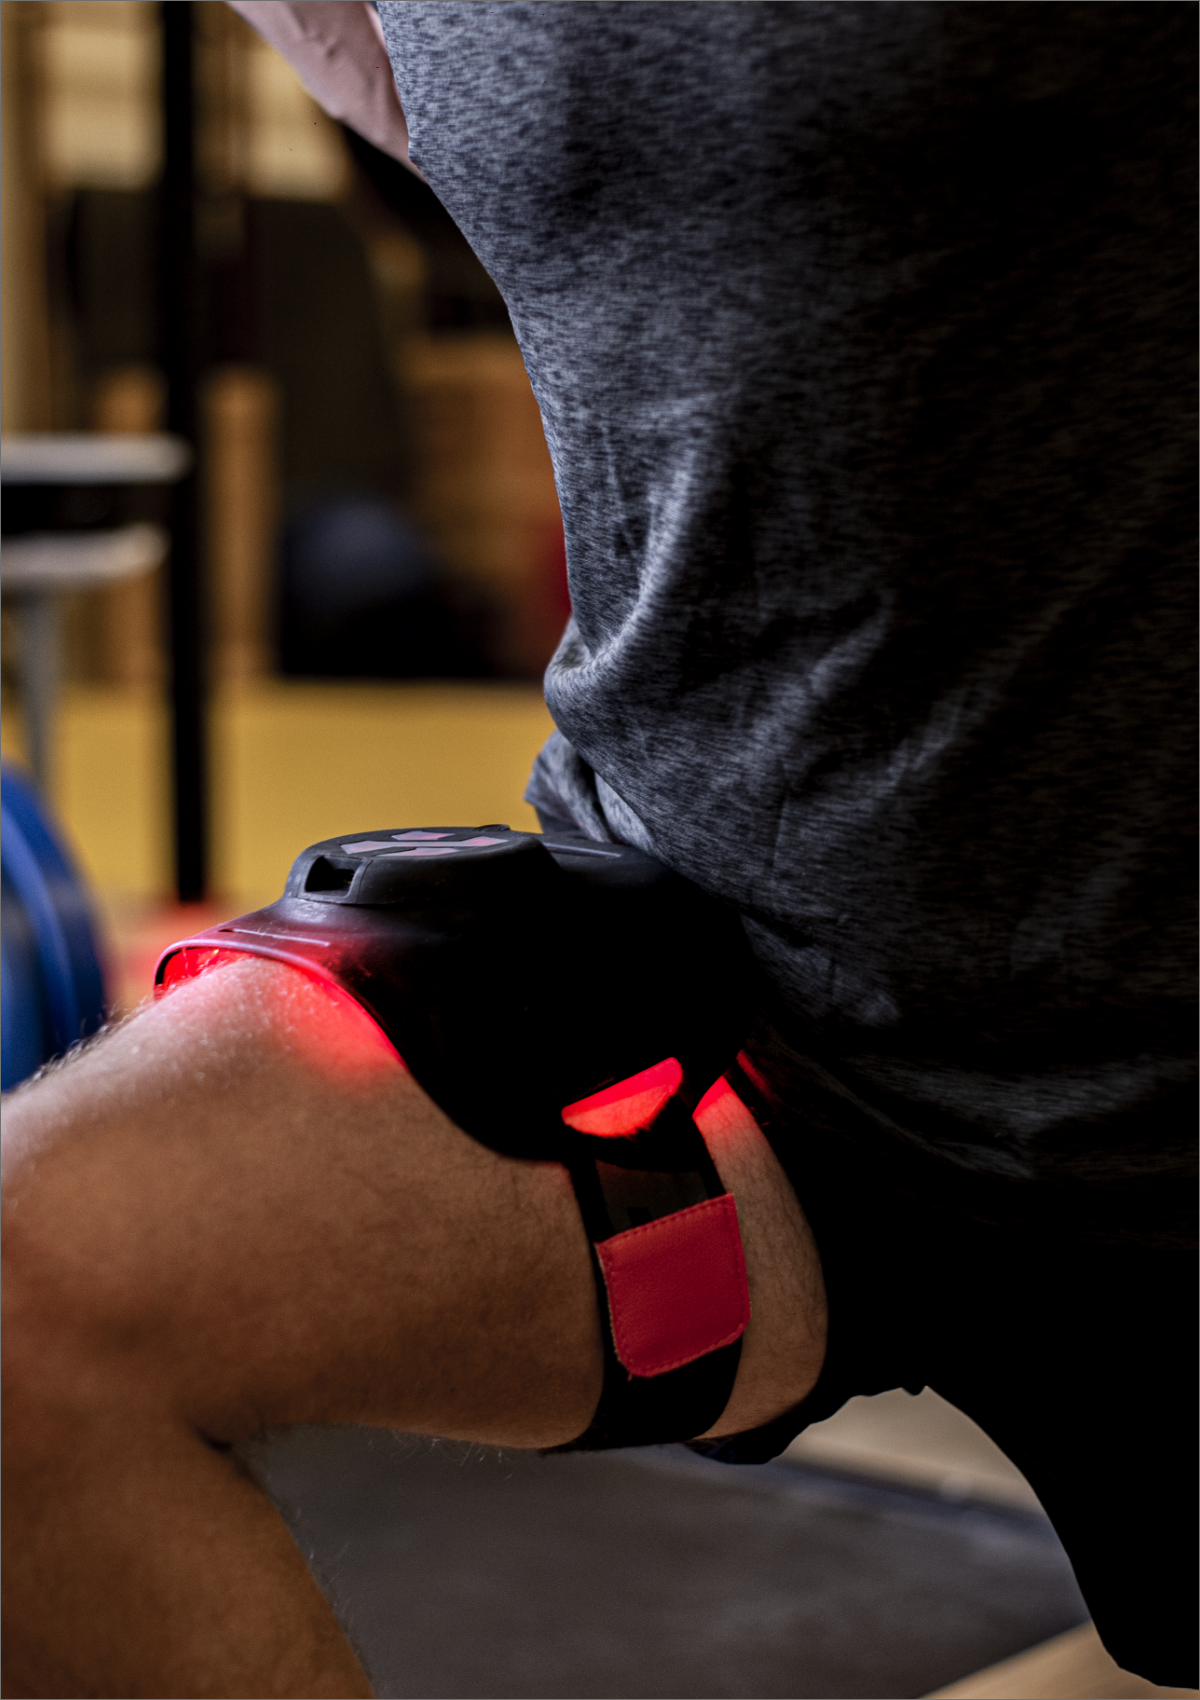 Lumaflex | Body Pro | Targeted pain relief through red light therapy